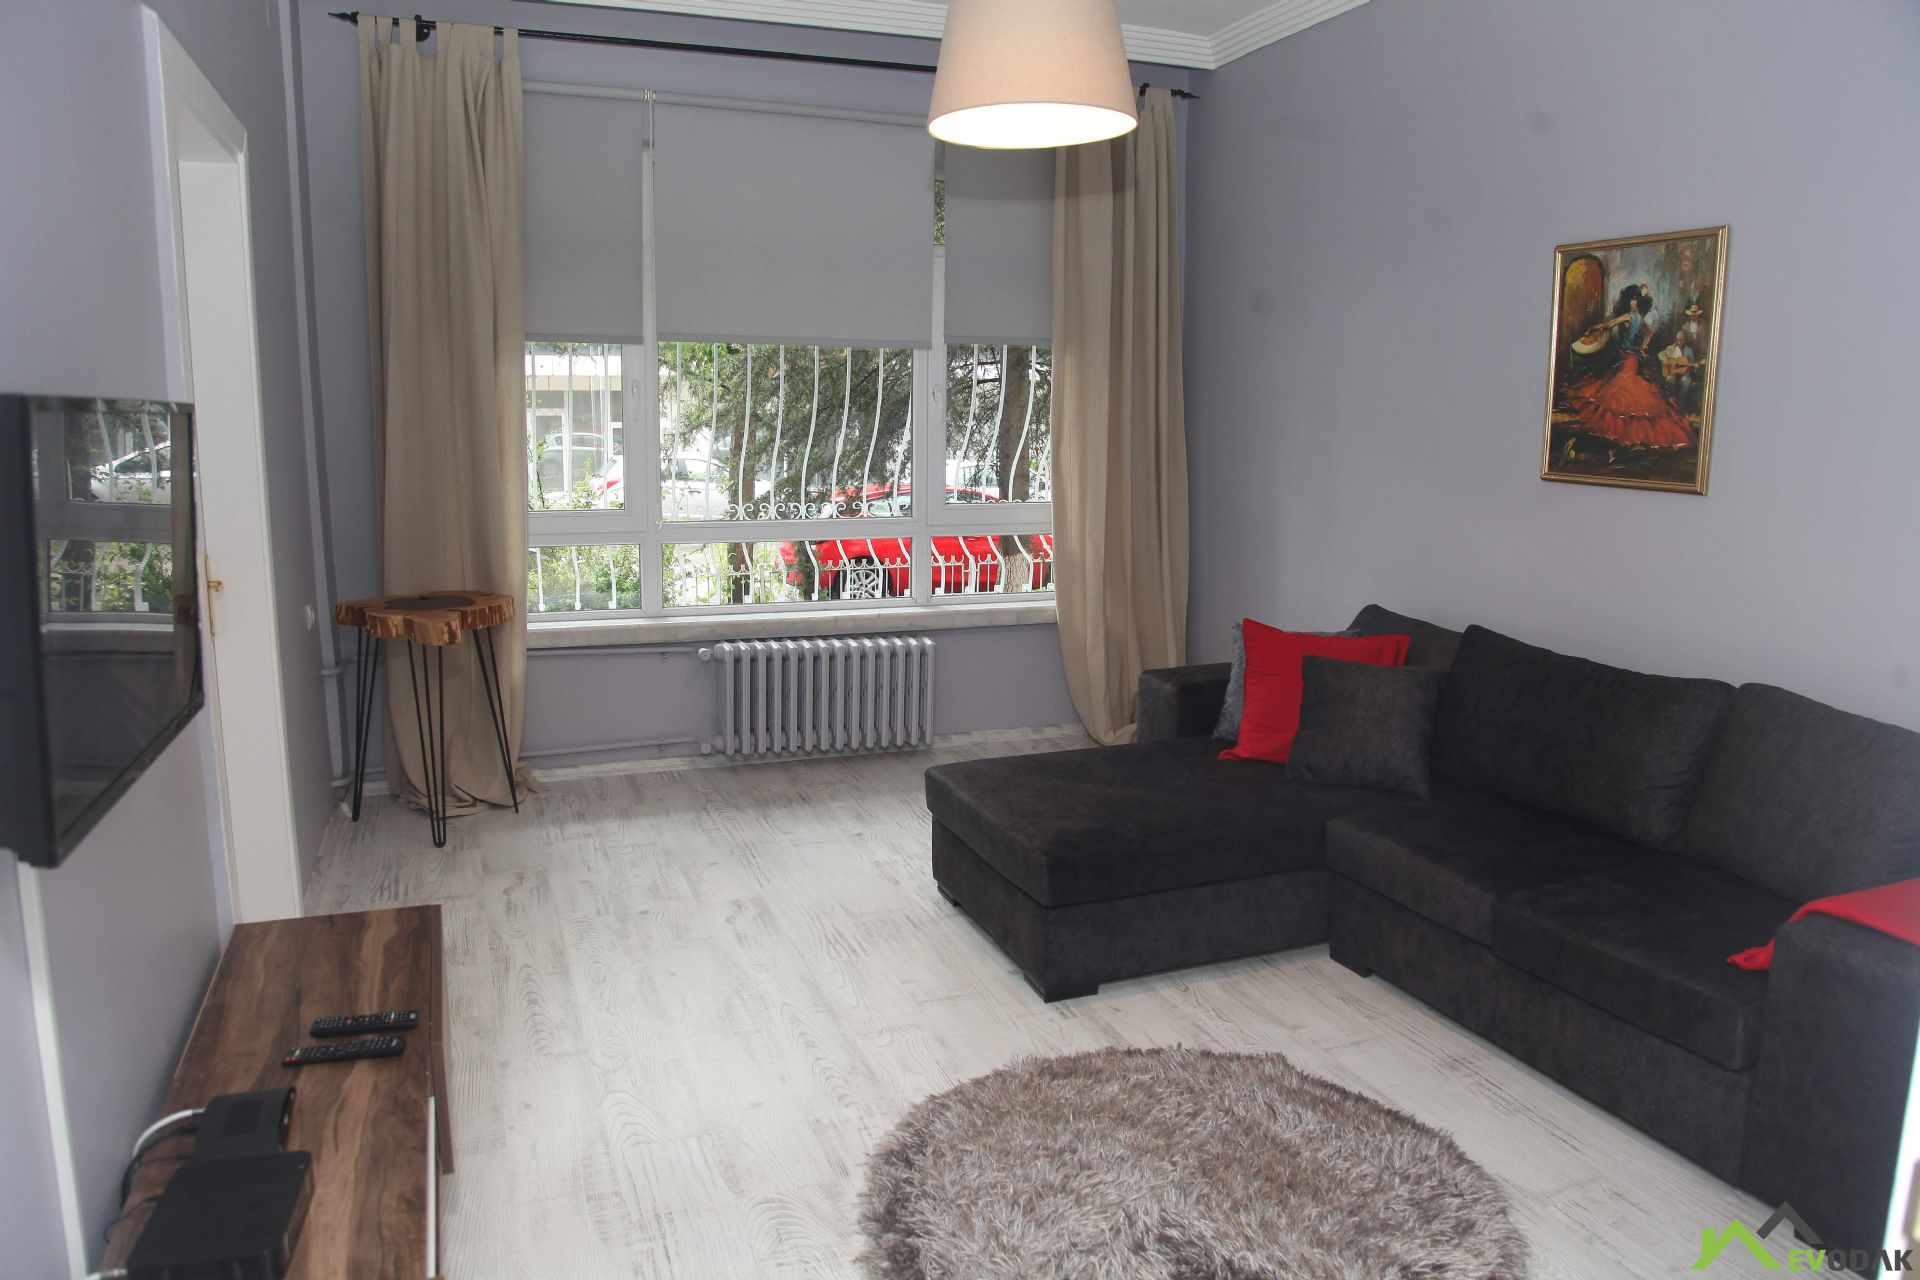 For Rent Monthly Rental Cankaya